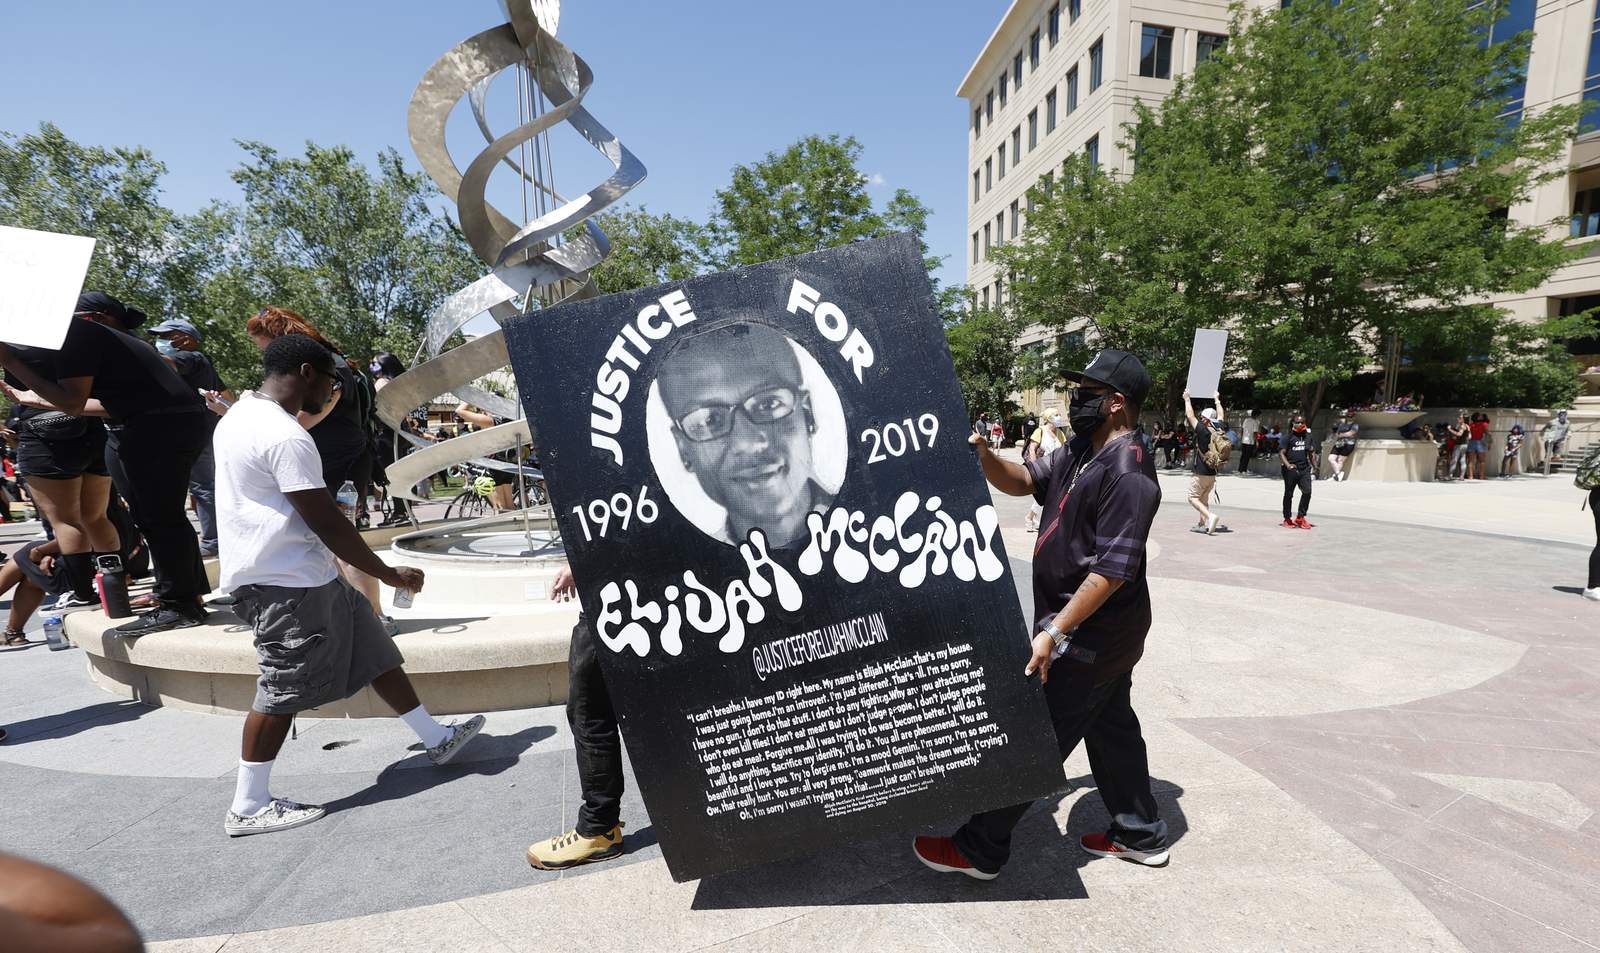 Union: Colorado officer fired in Elijah McClain photo probe